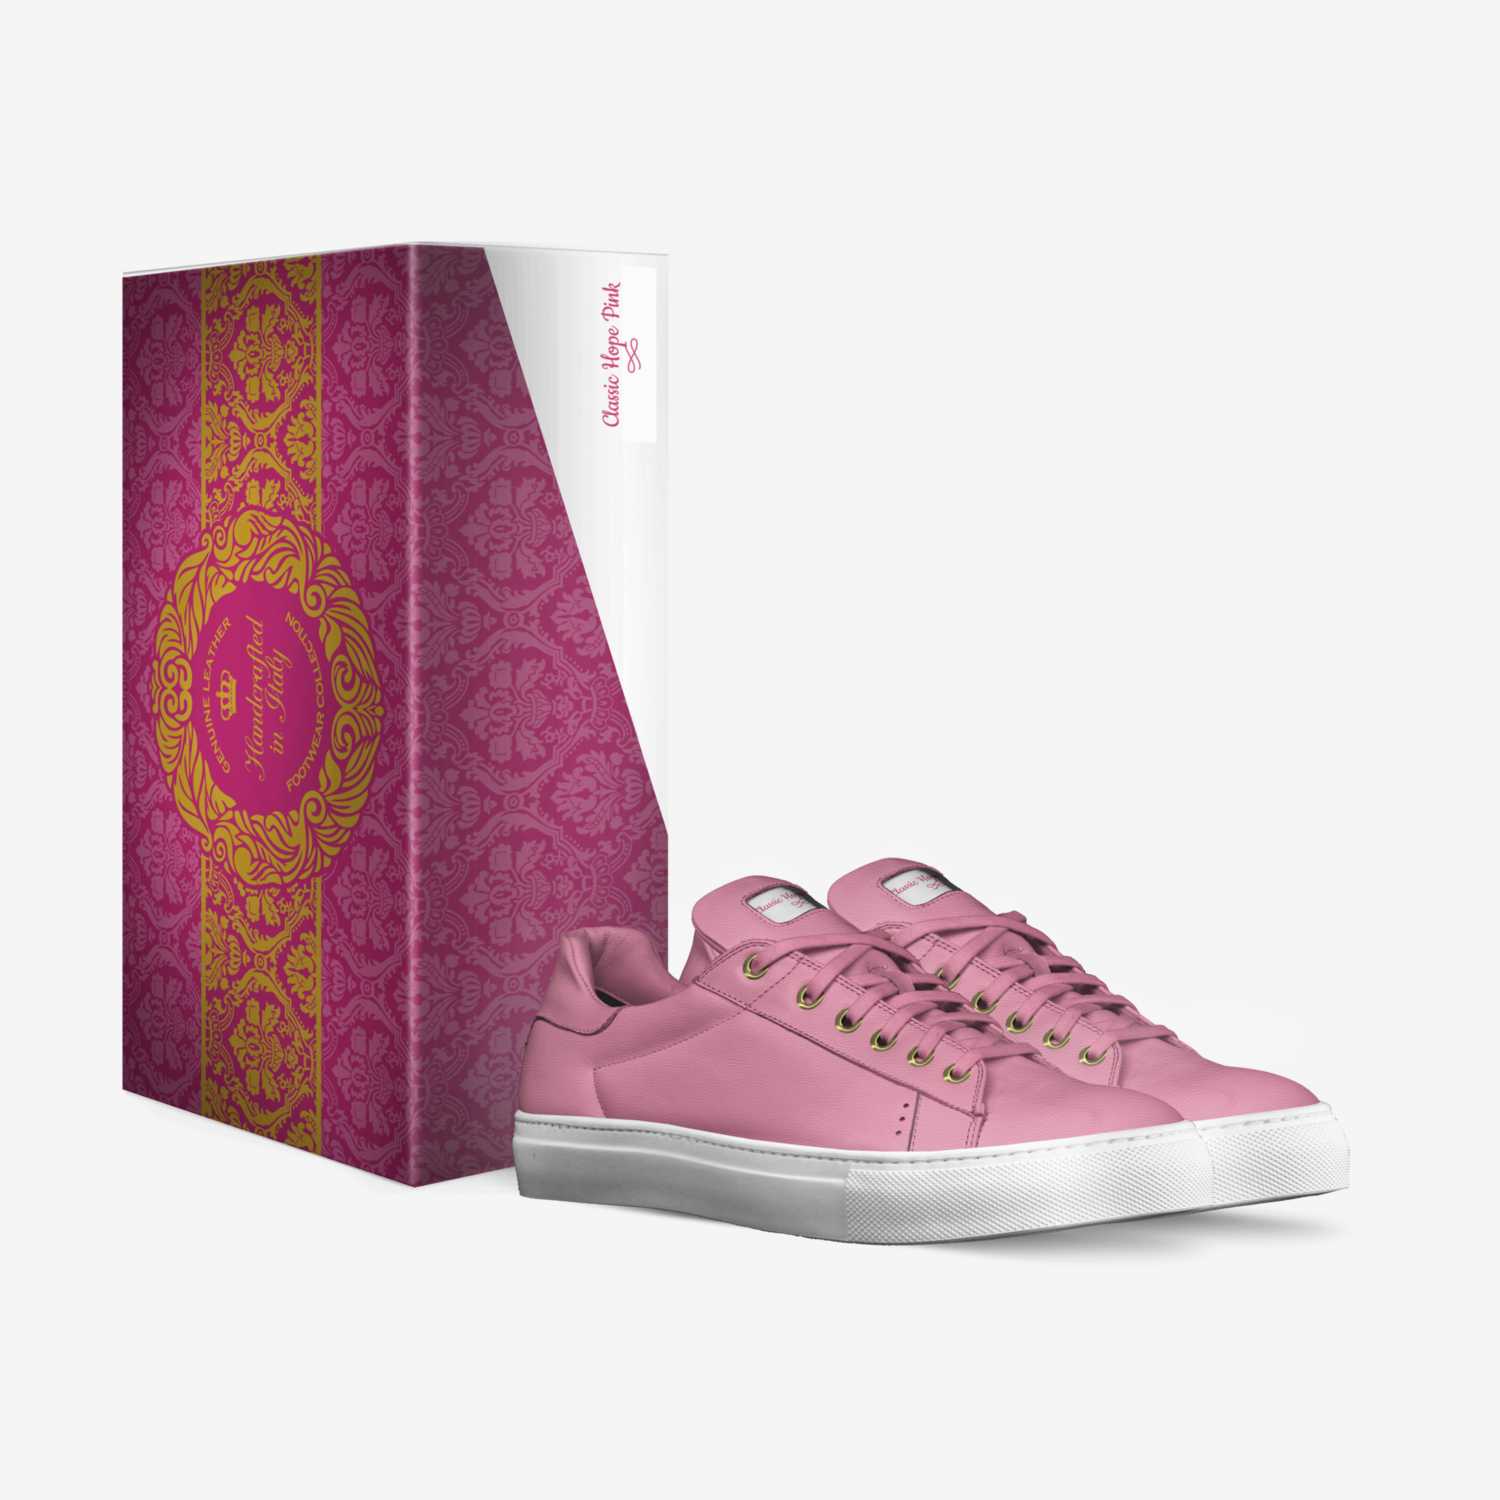 Classic Hope Pink custom made in Italy shoes by Bls Footwear | Box view